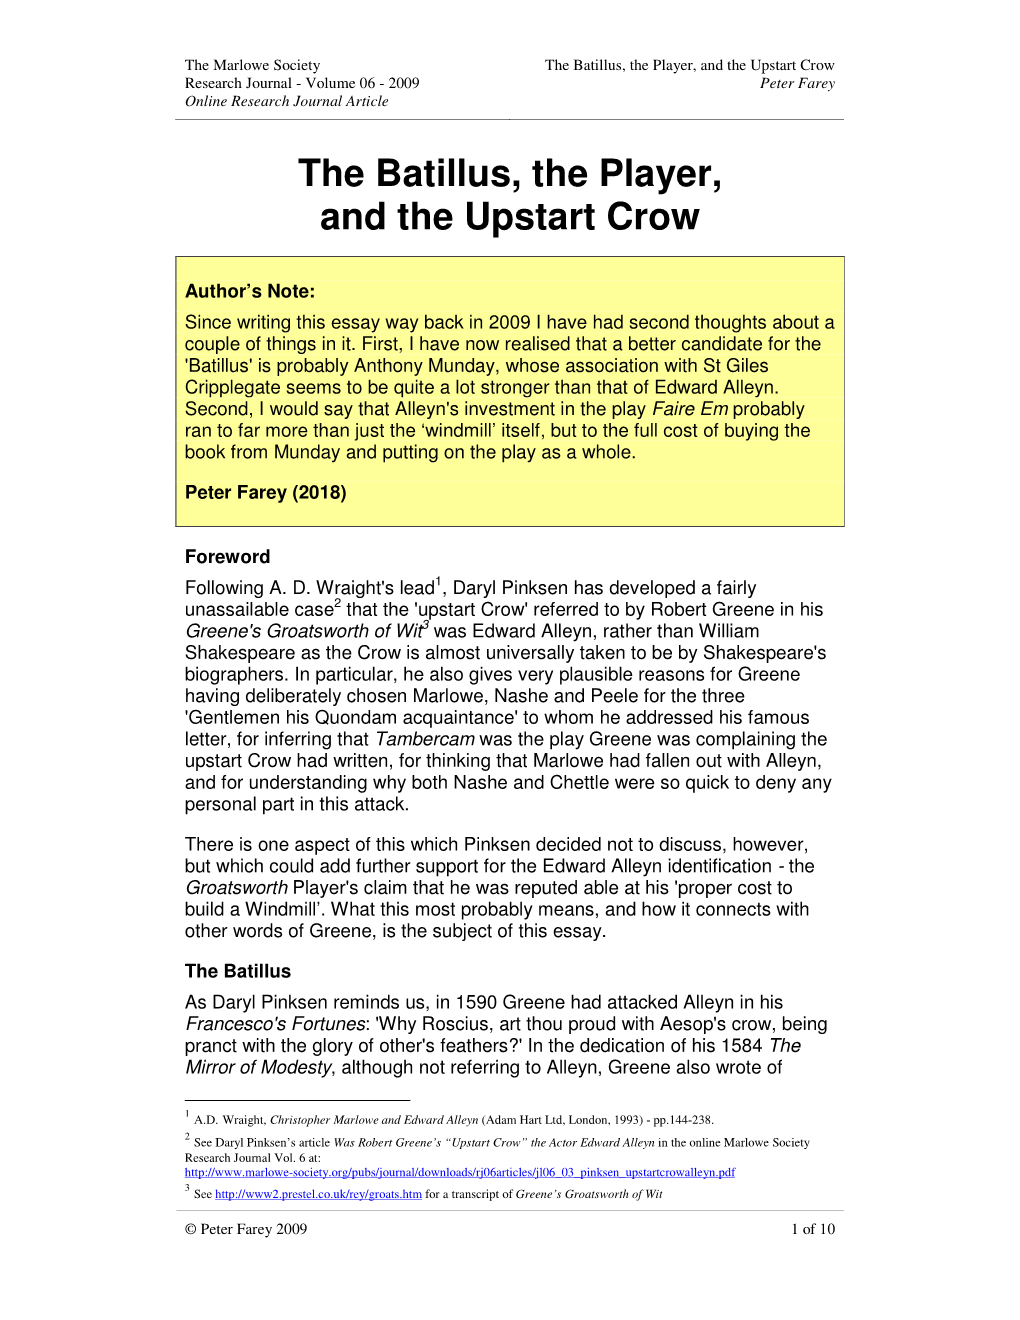 The Batillus, the Player, and the Upstart Crow Research Journal - Volume 06 - 2009 Peter Farey Online Research Journal Article